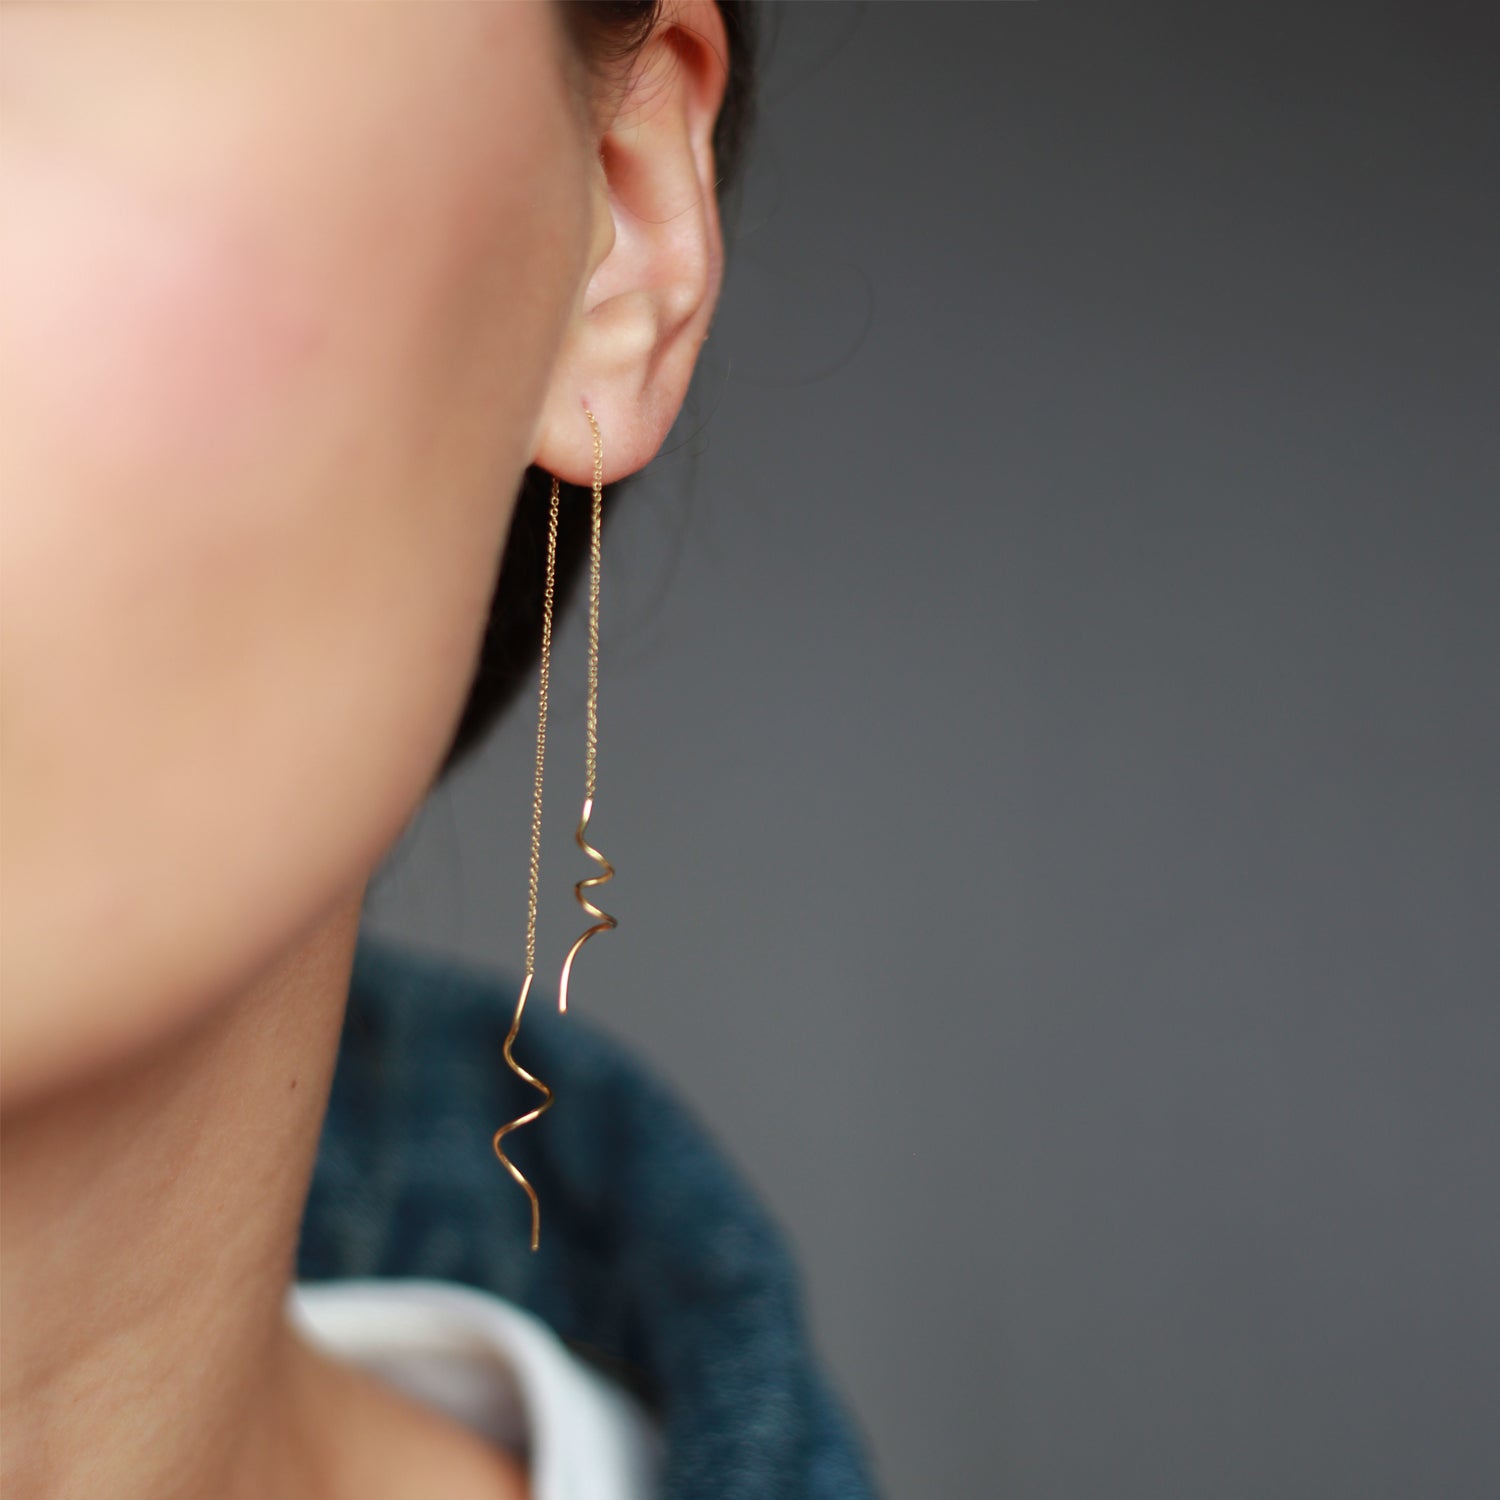 18ct yellow gold thread through earrings with hanging doodles on both ends on mode